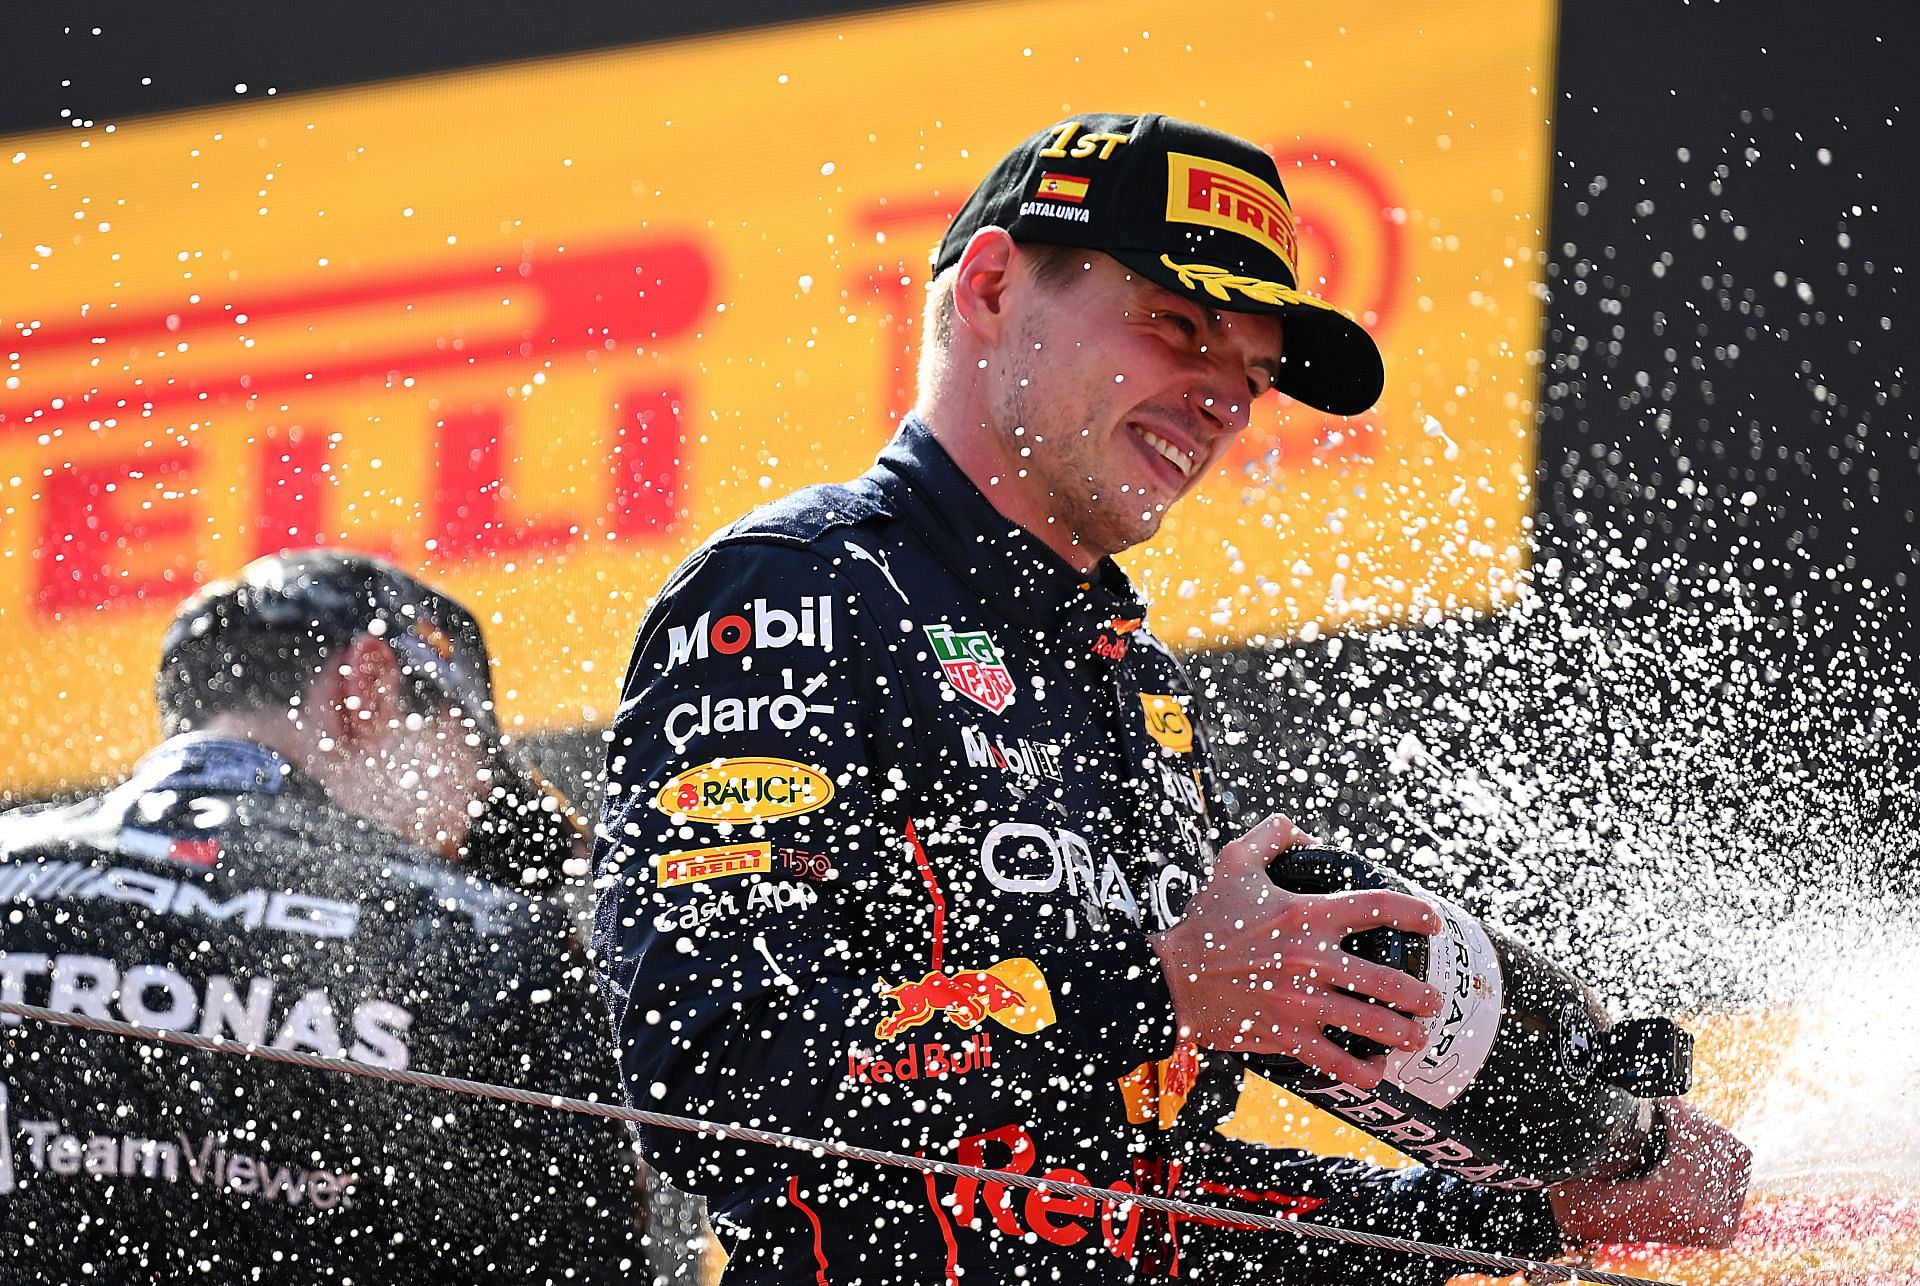 Max Verstappen at the F1 Grand Prix of Spain